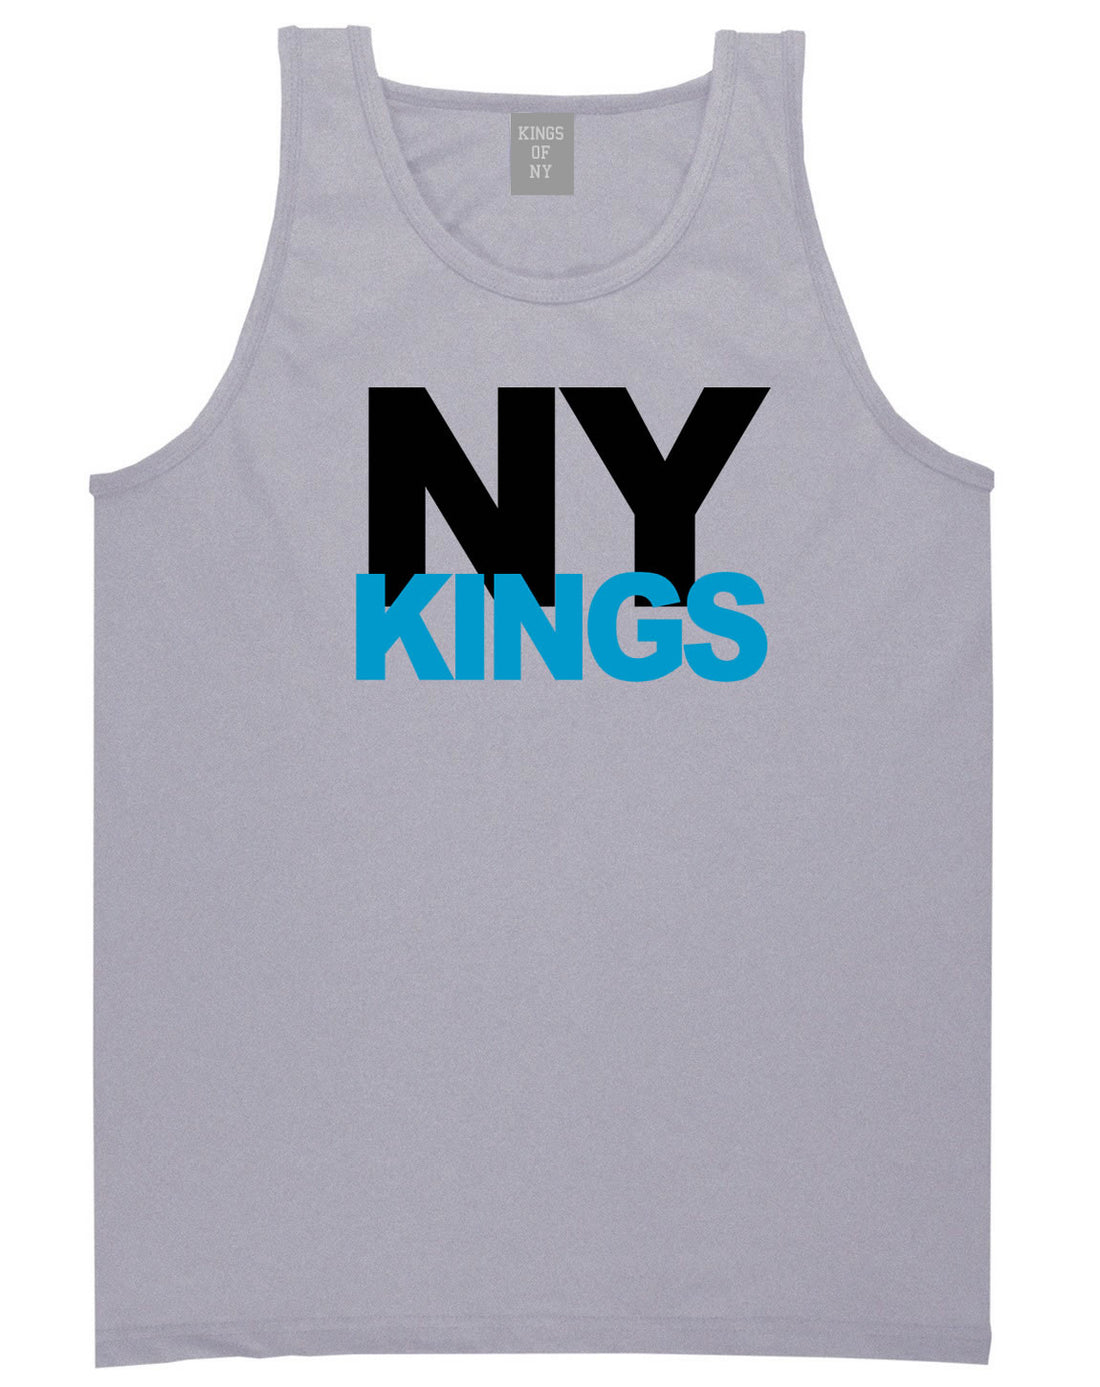 NY Kings Knows Tank Top in Grey By Kings Of NY